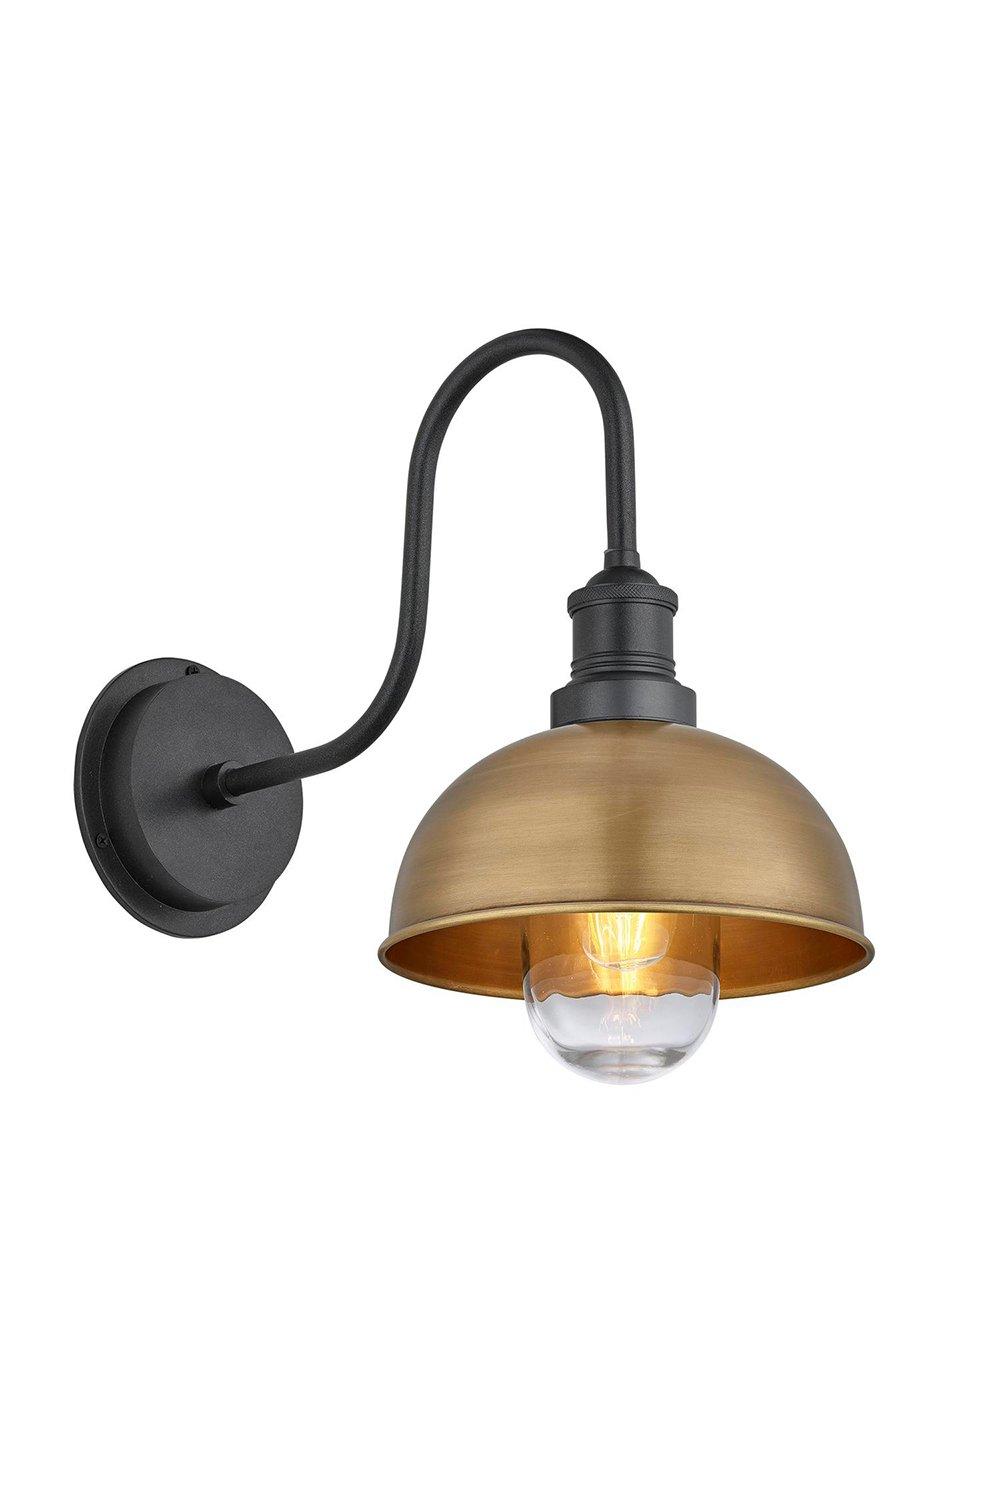 Swan Neck Outdoor & Bathroom Dome Wall Light, 8 Inch, Brass, Pewter Holder